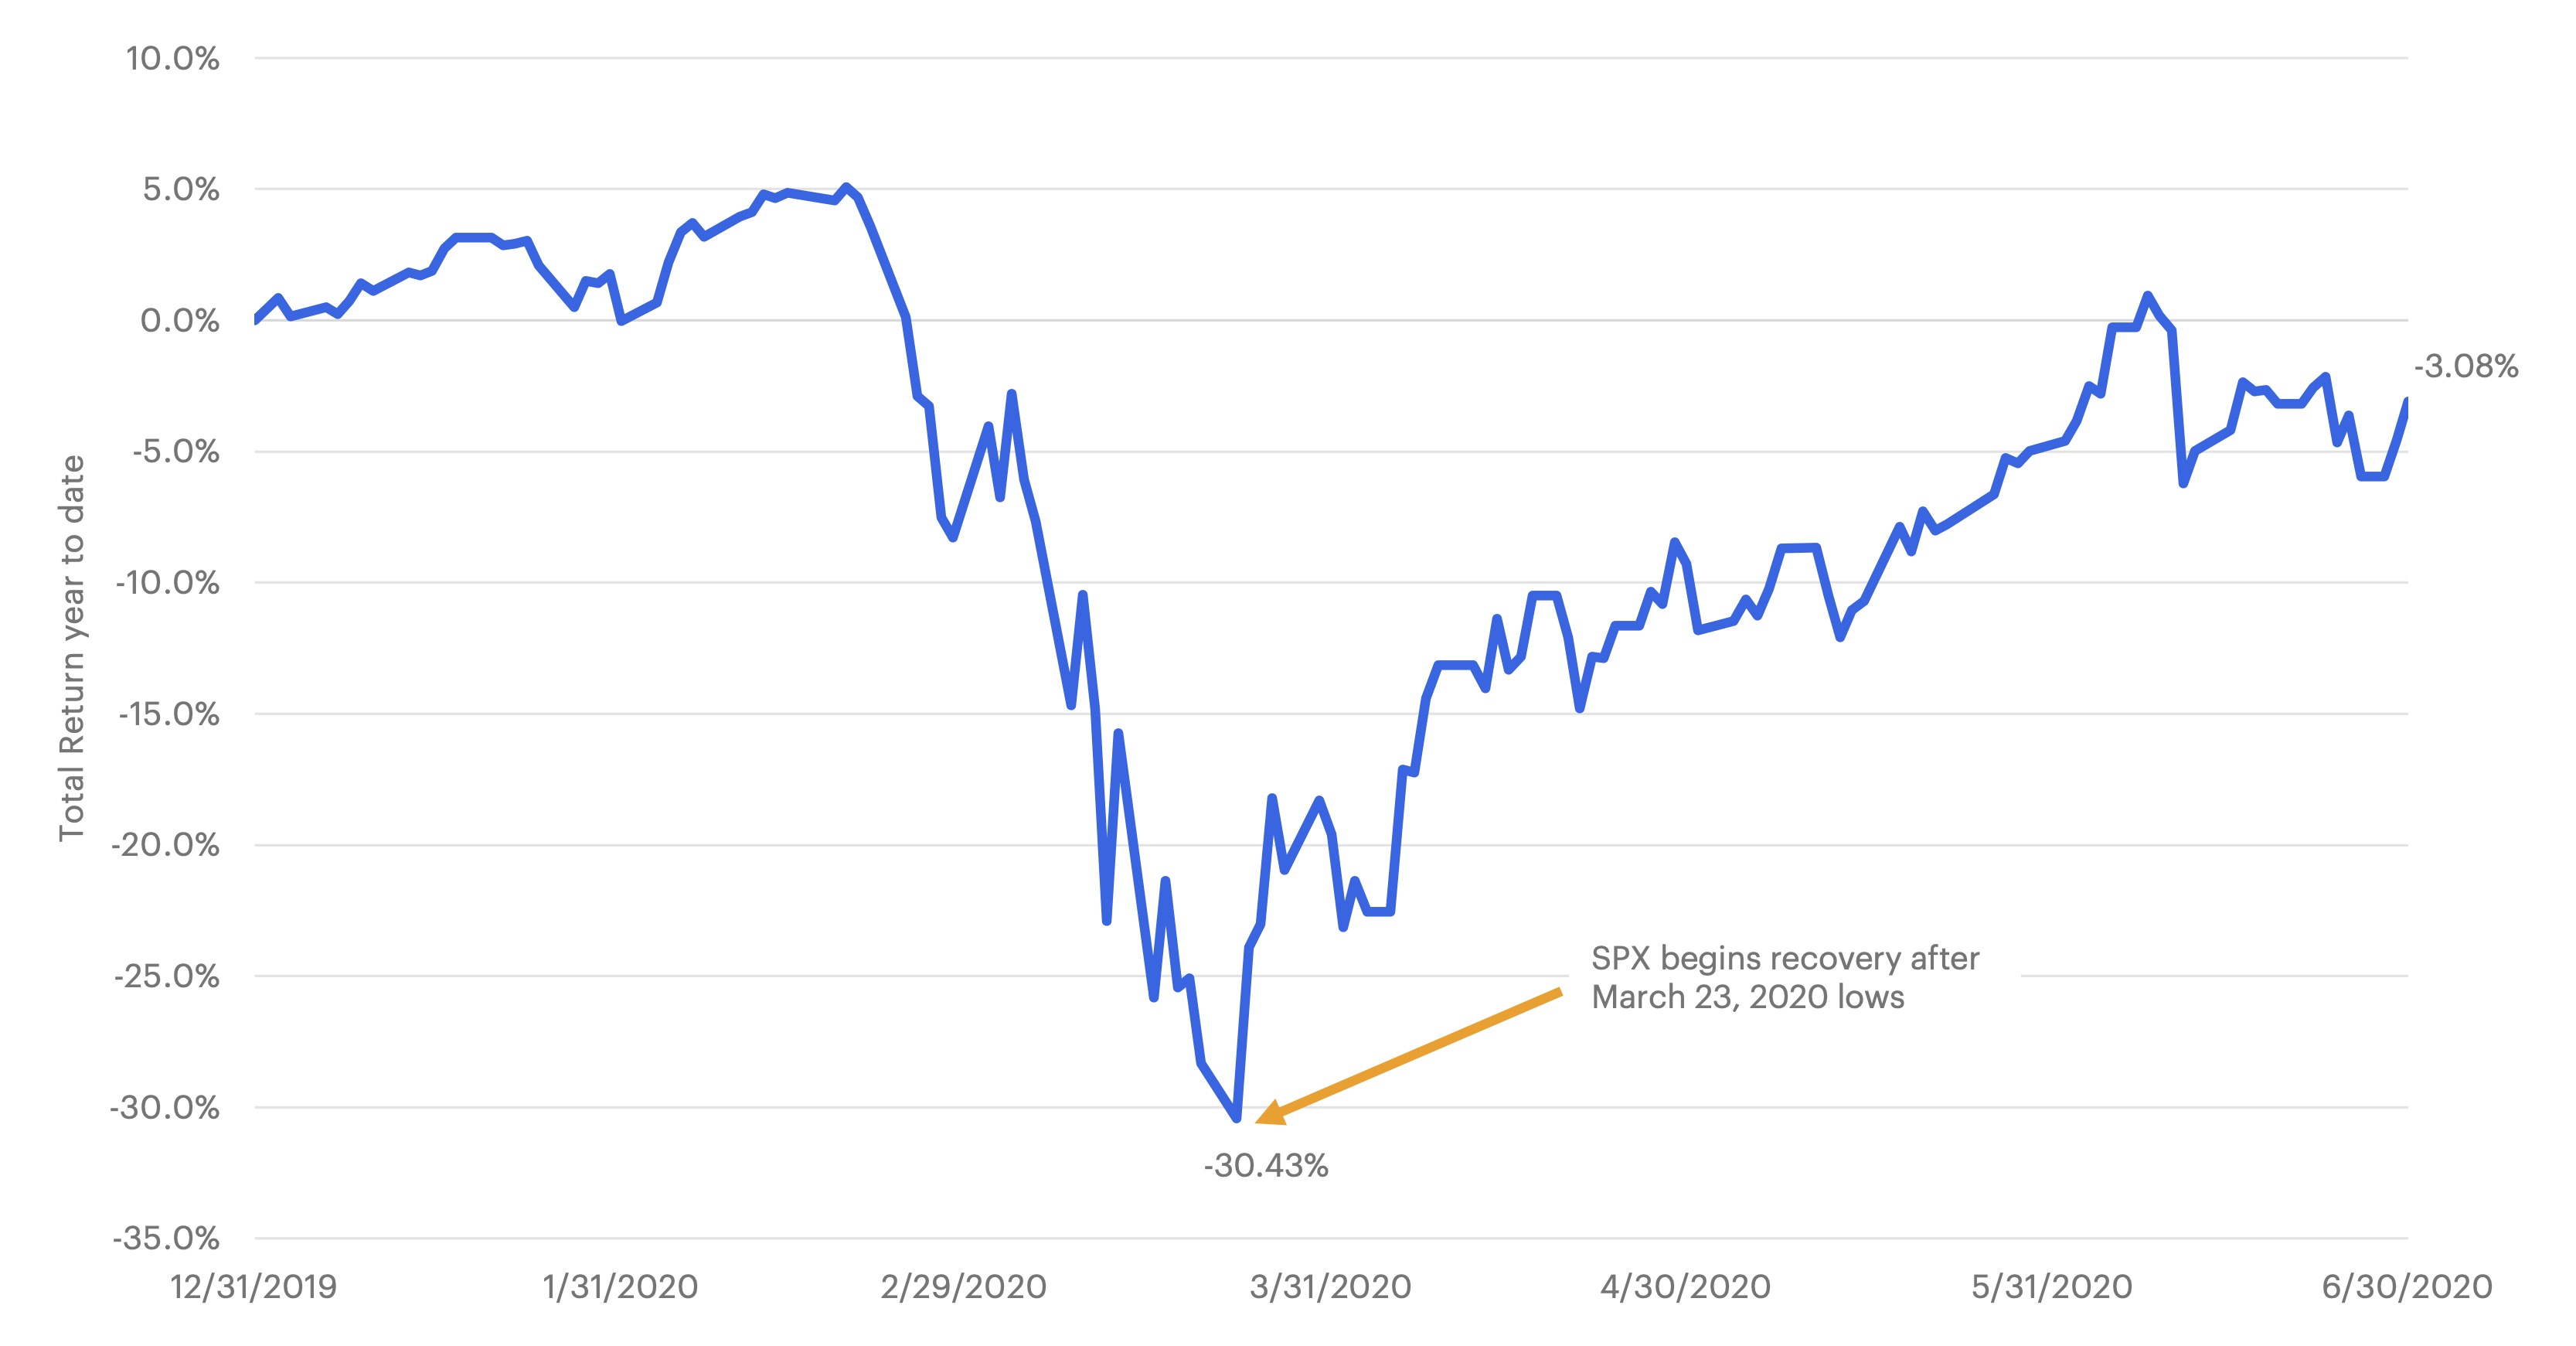 Chart displaying S&P 500 data from January 1, 2020 to June 30, 2020. 